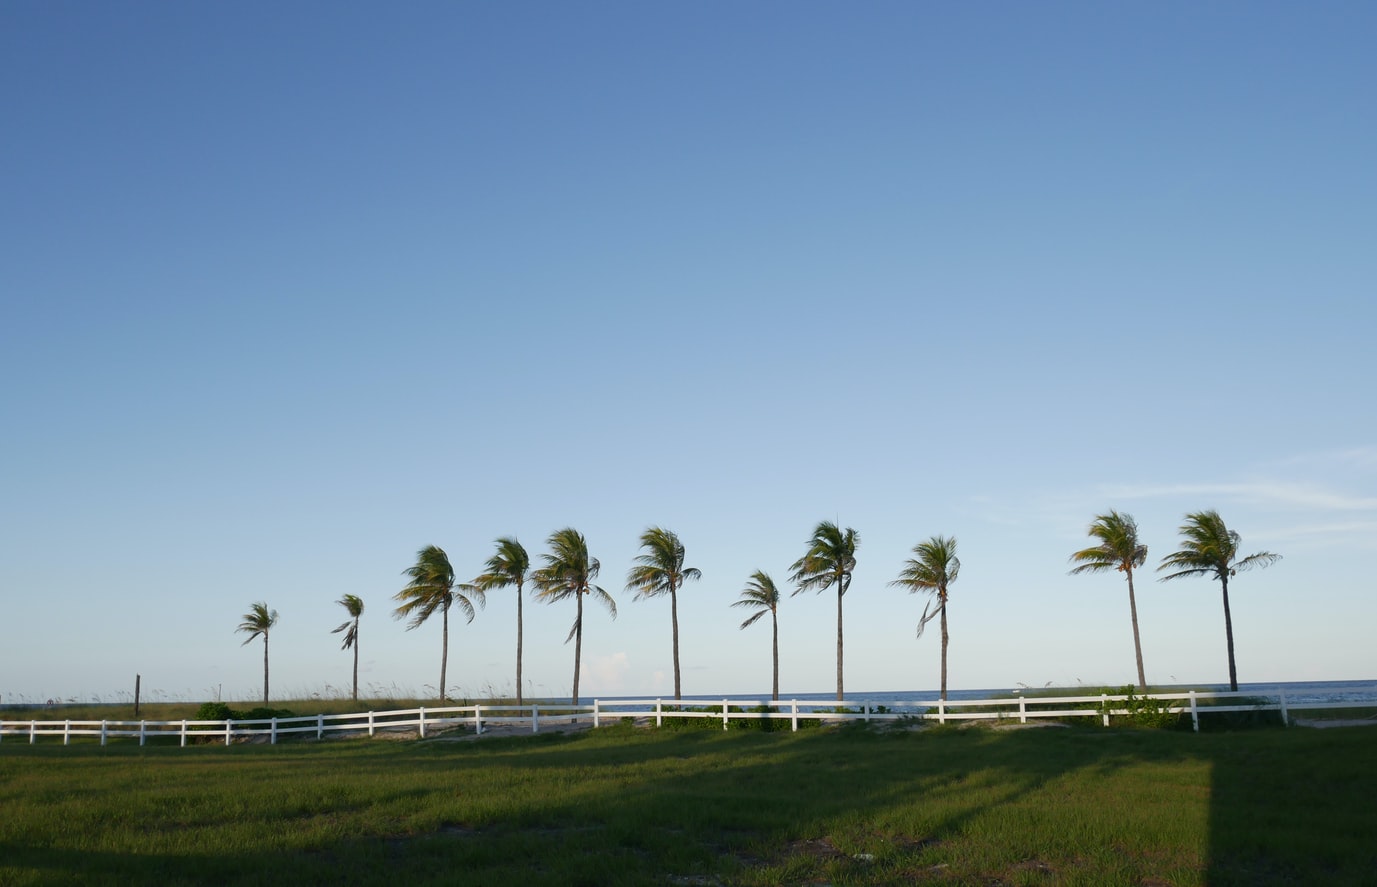 Palm trees swaying by the sea in Fort Lauderdale, Florida. 